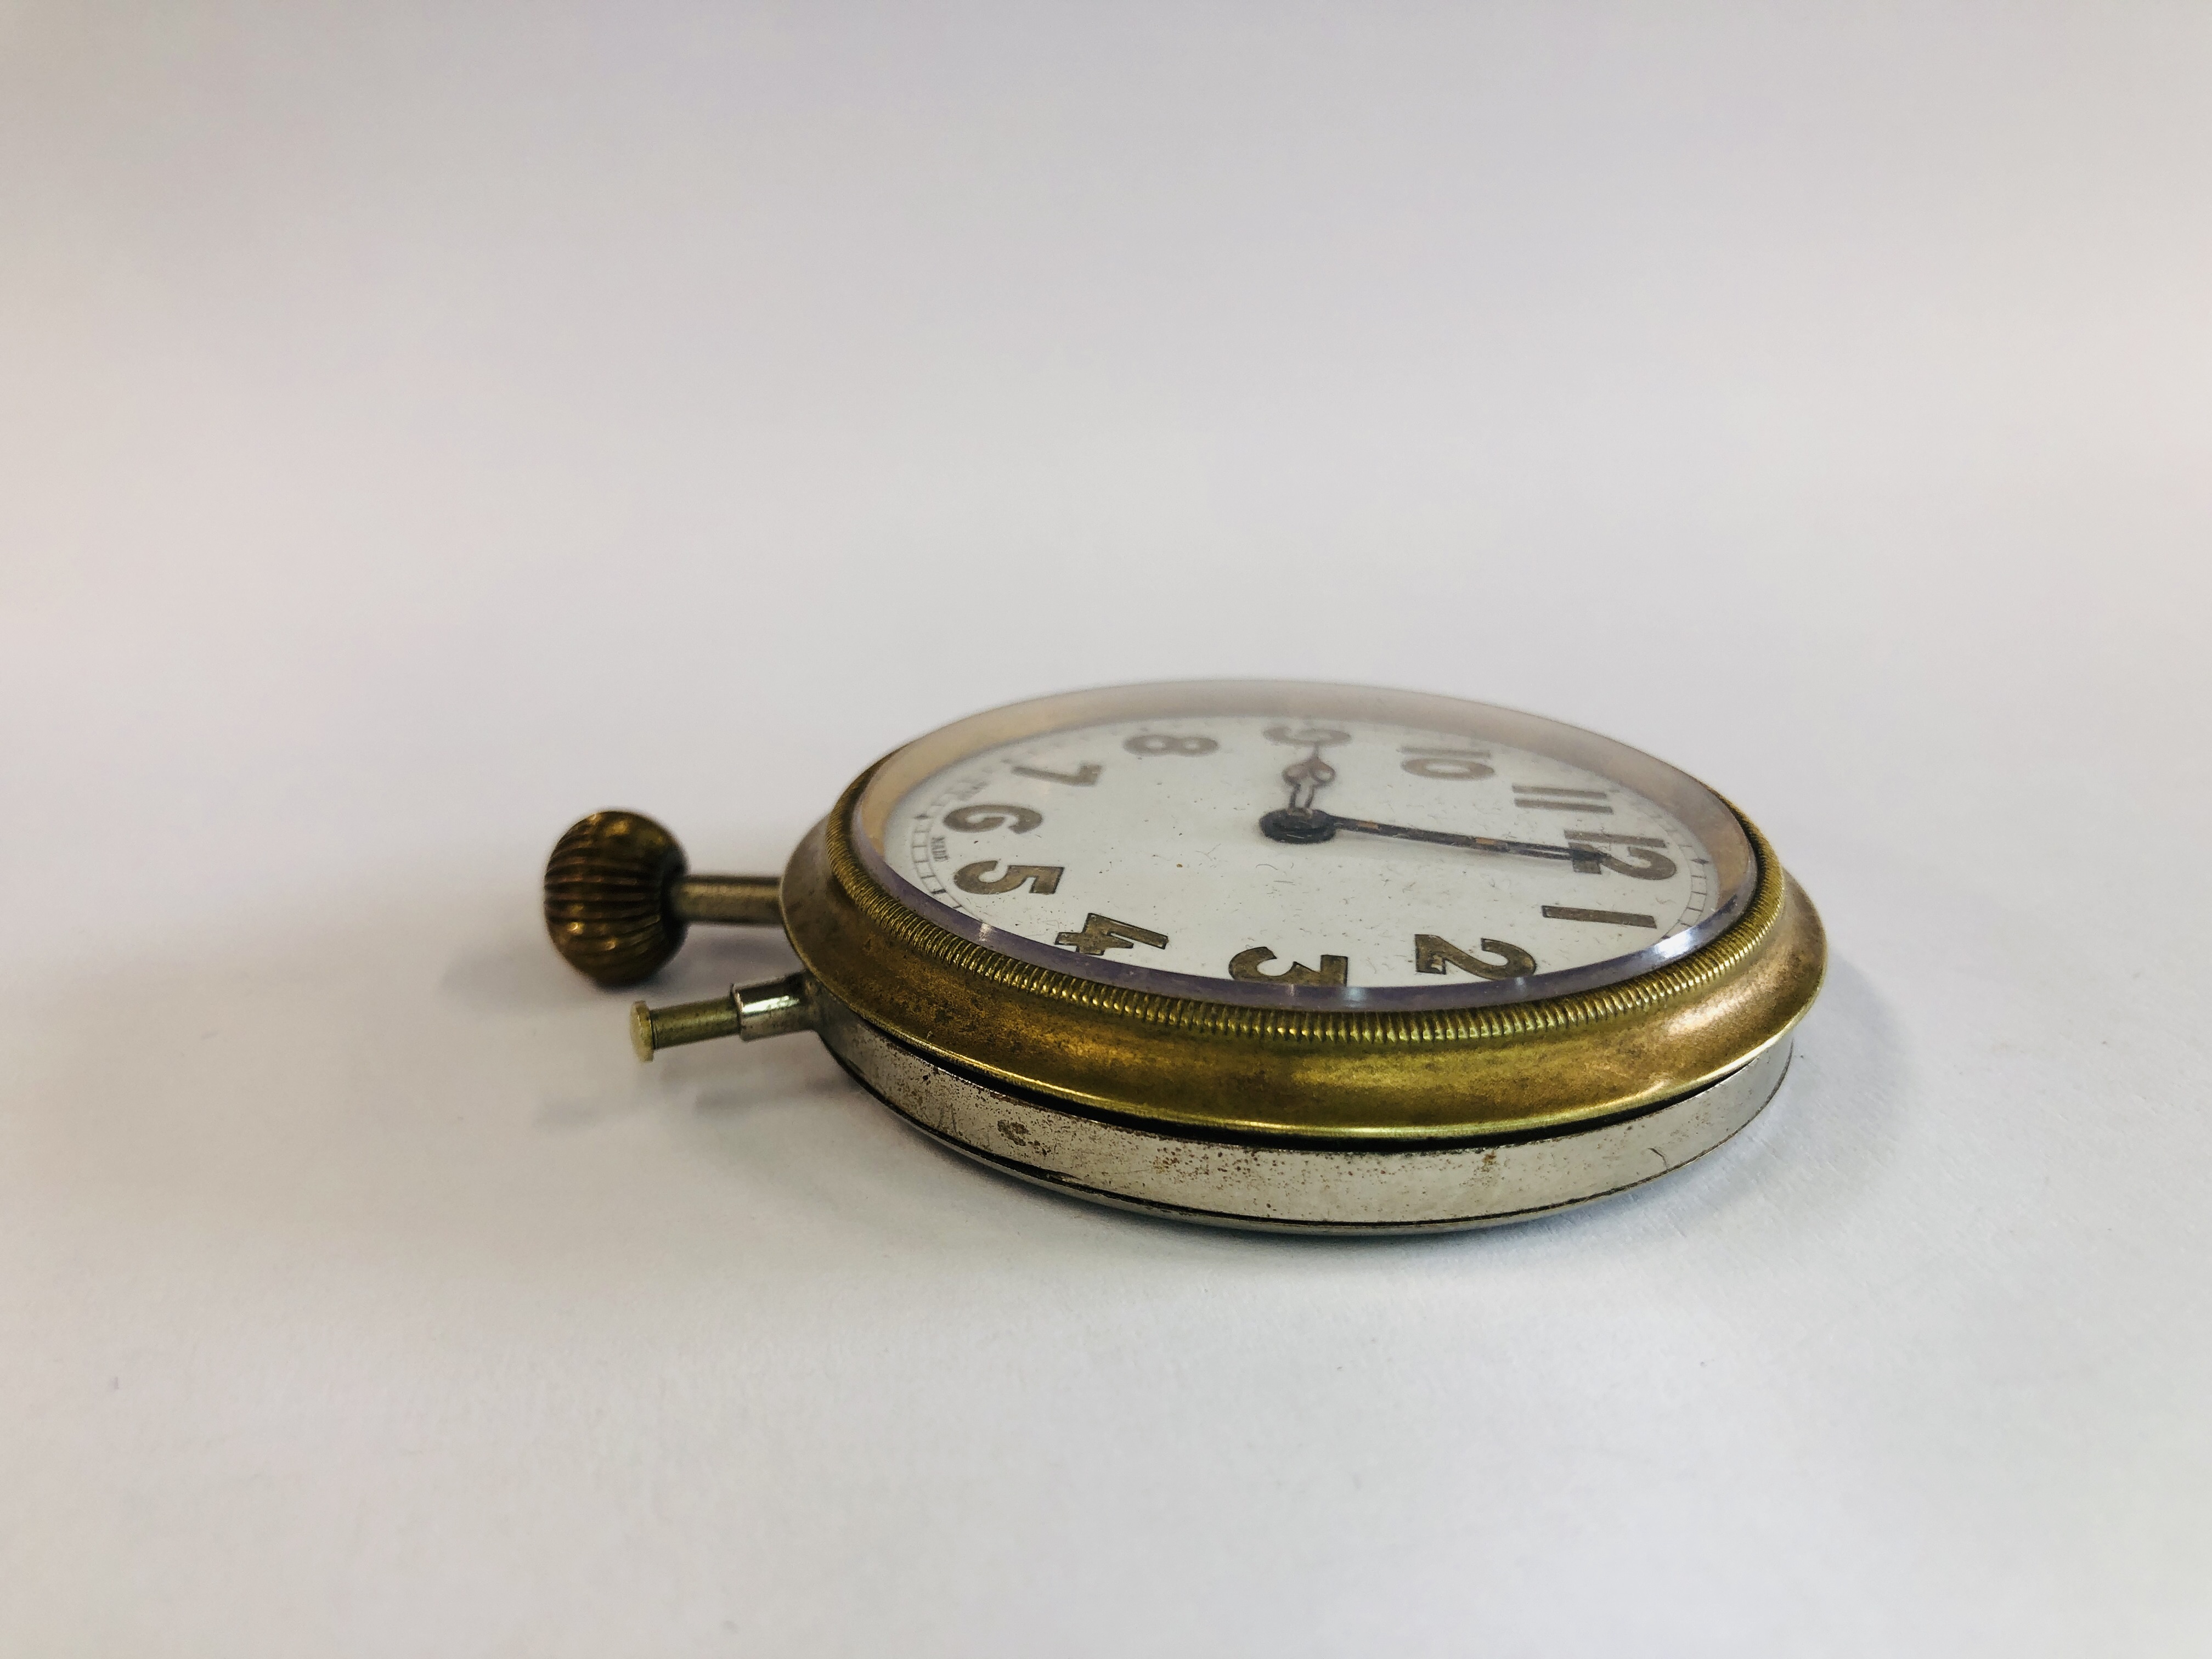 A VINTAGE SWISS MADE POCKET WATCH WITH ENAMEL DIAL. - Image 5 of 6